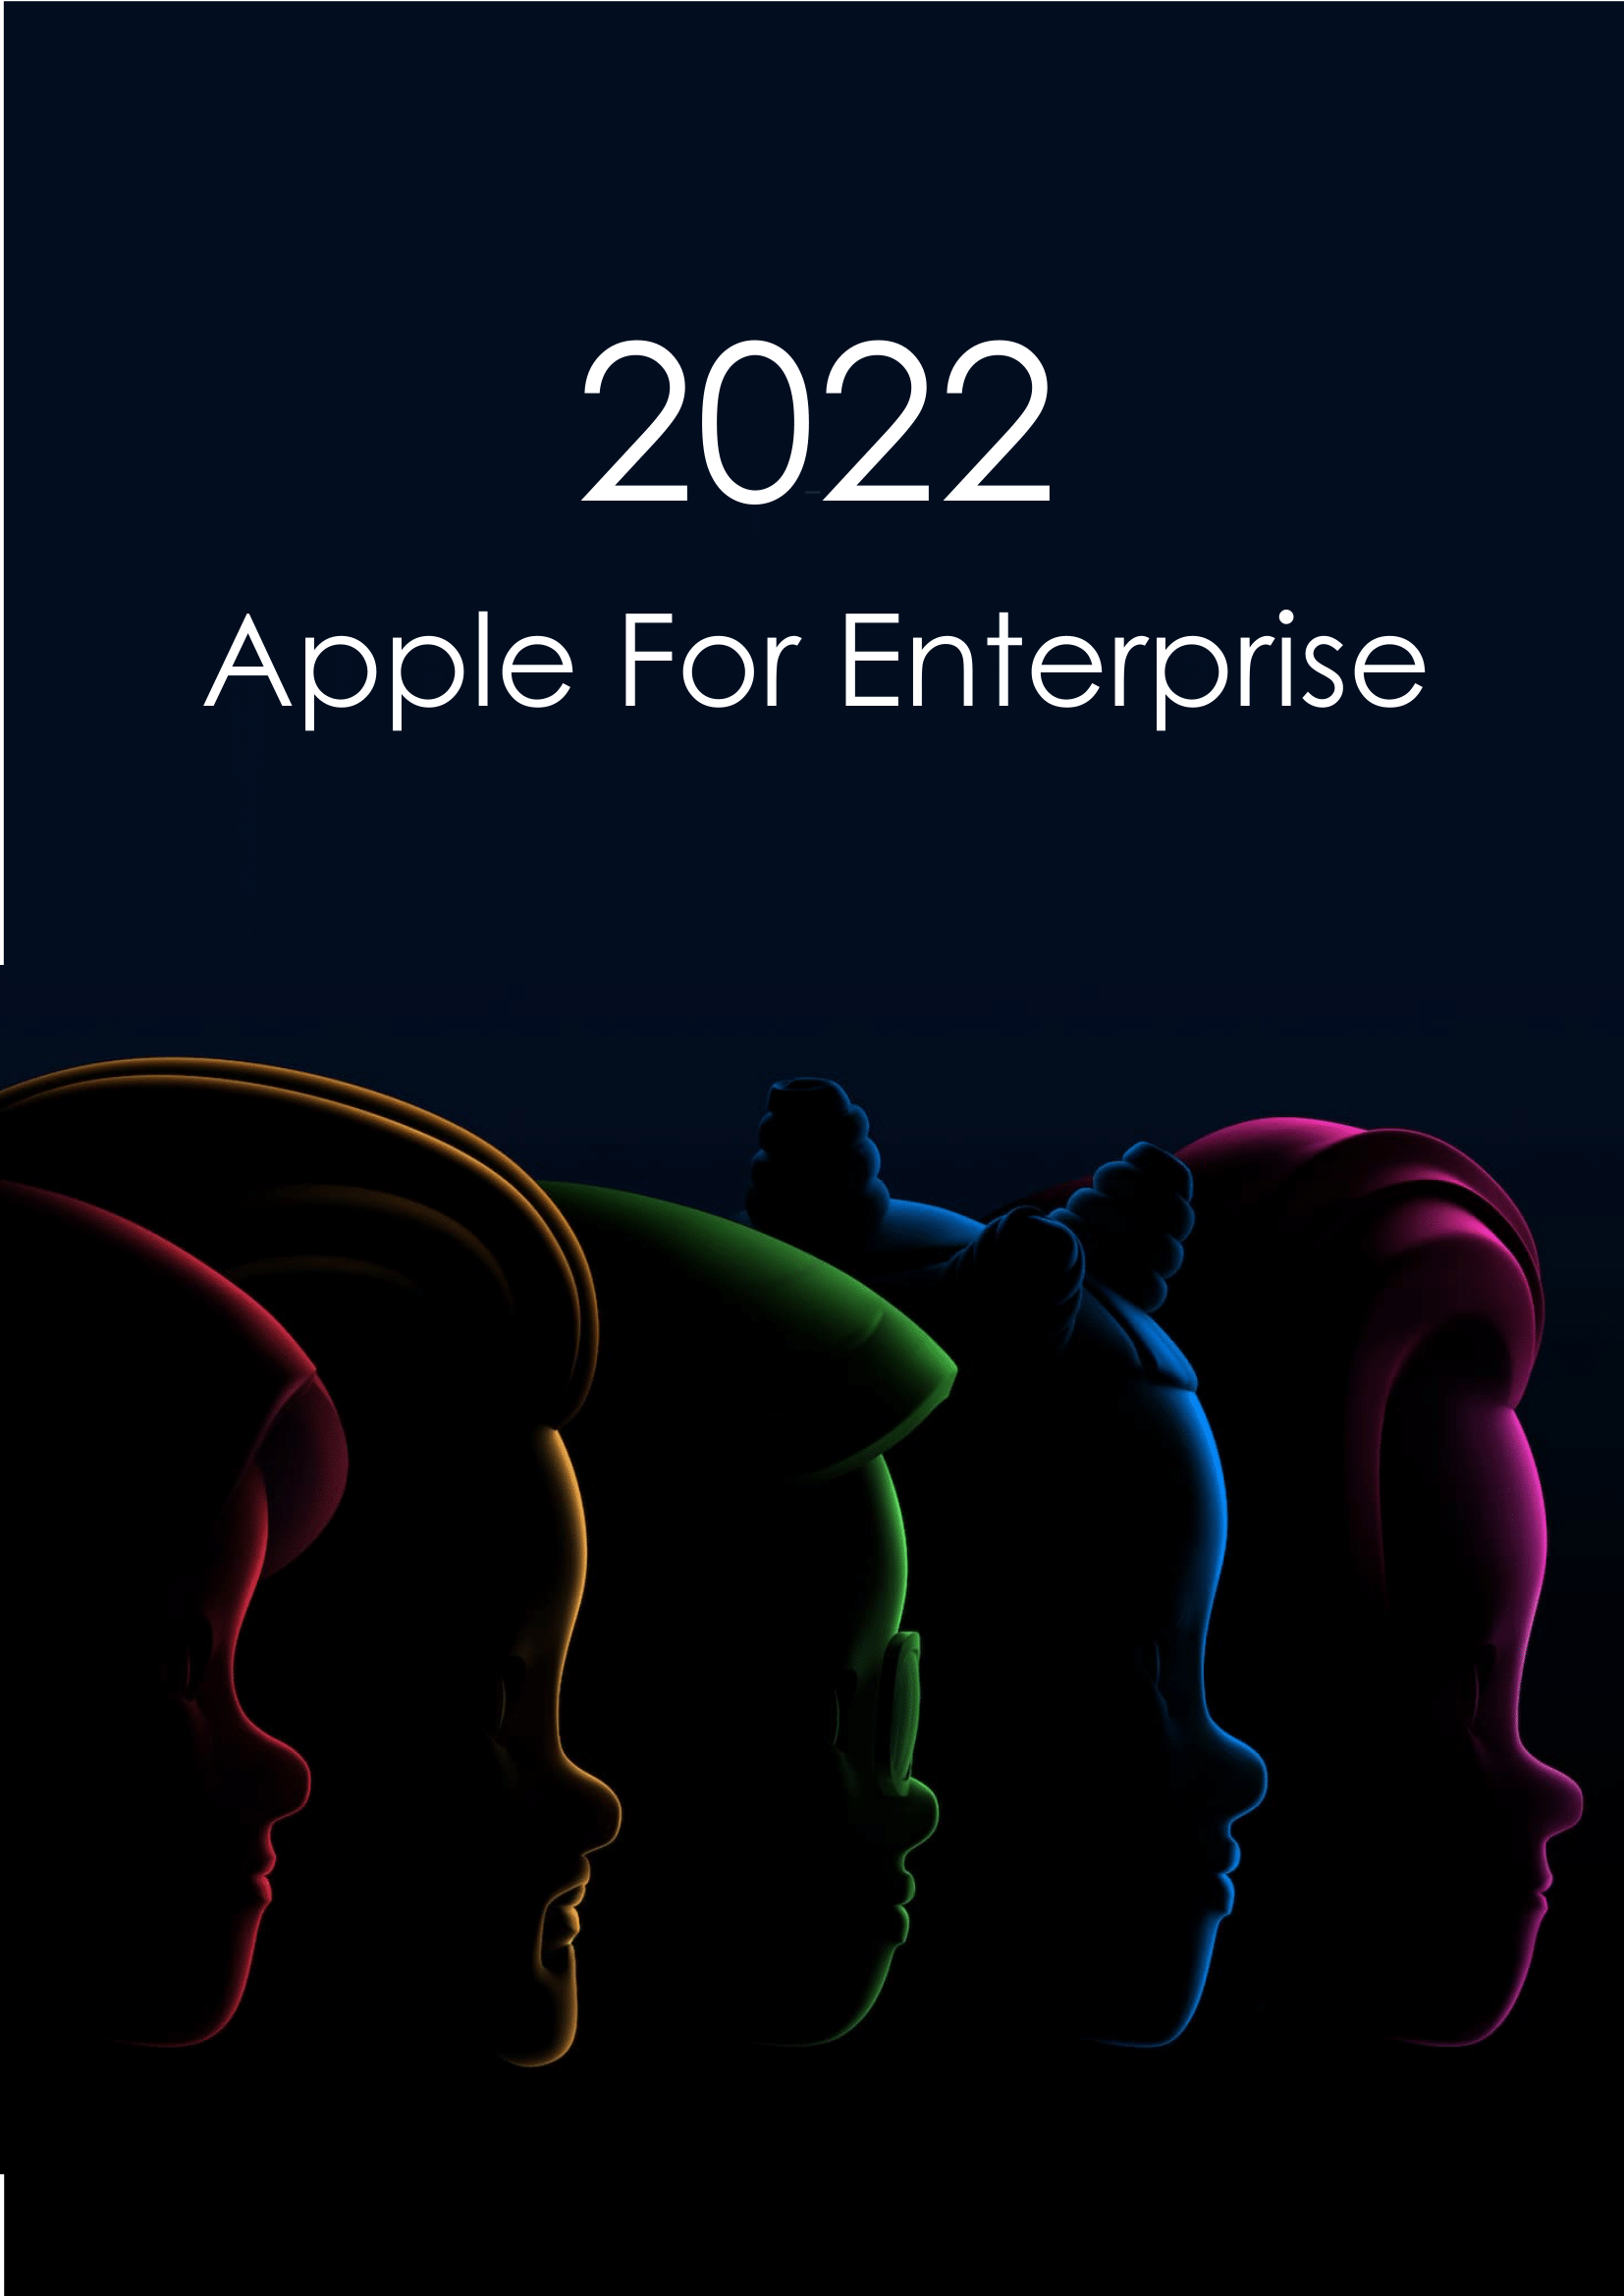 Download Our Free Whitepaper And Discover What Apple Has In Store For Your Business